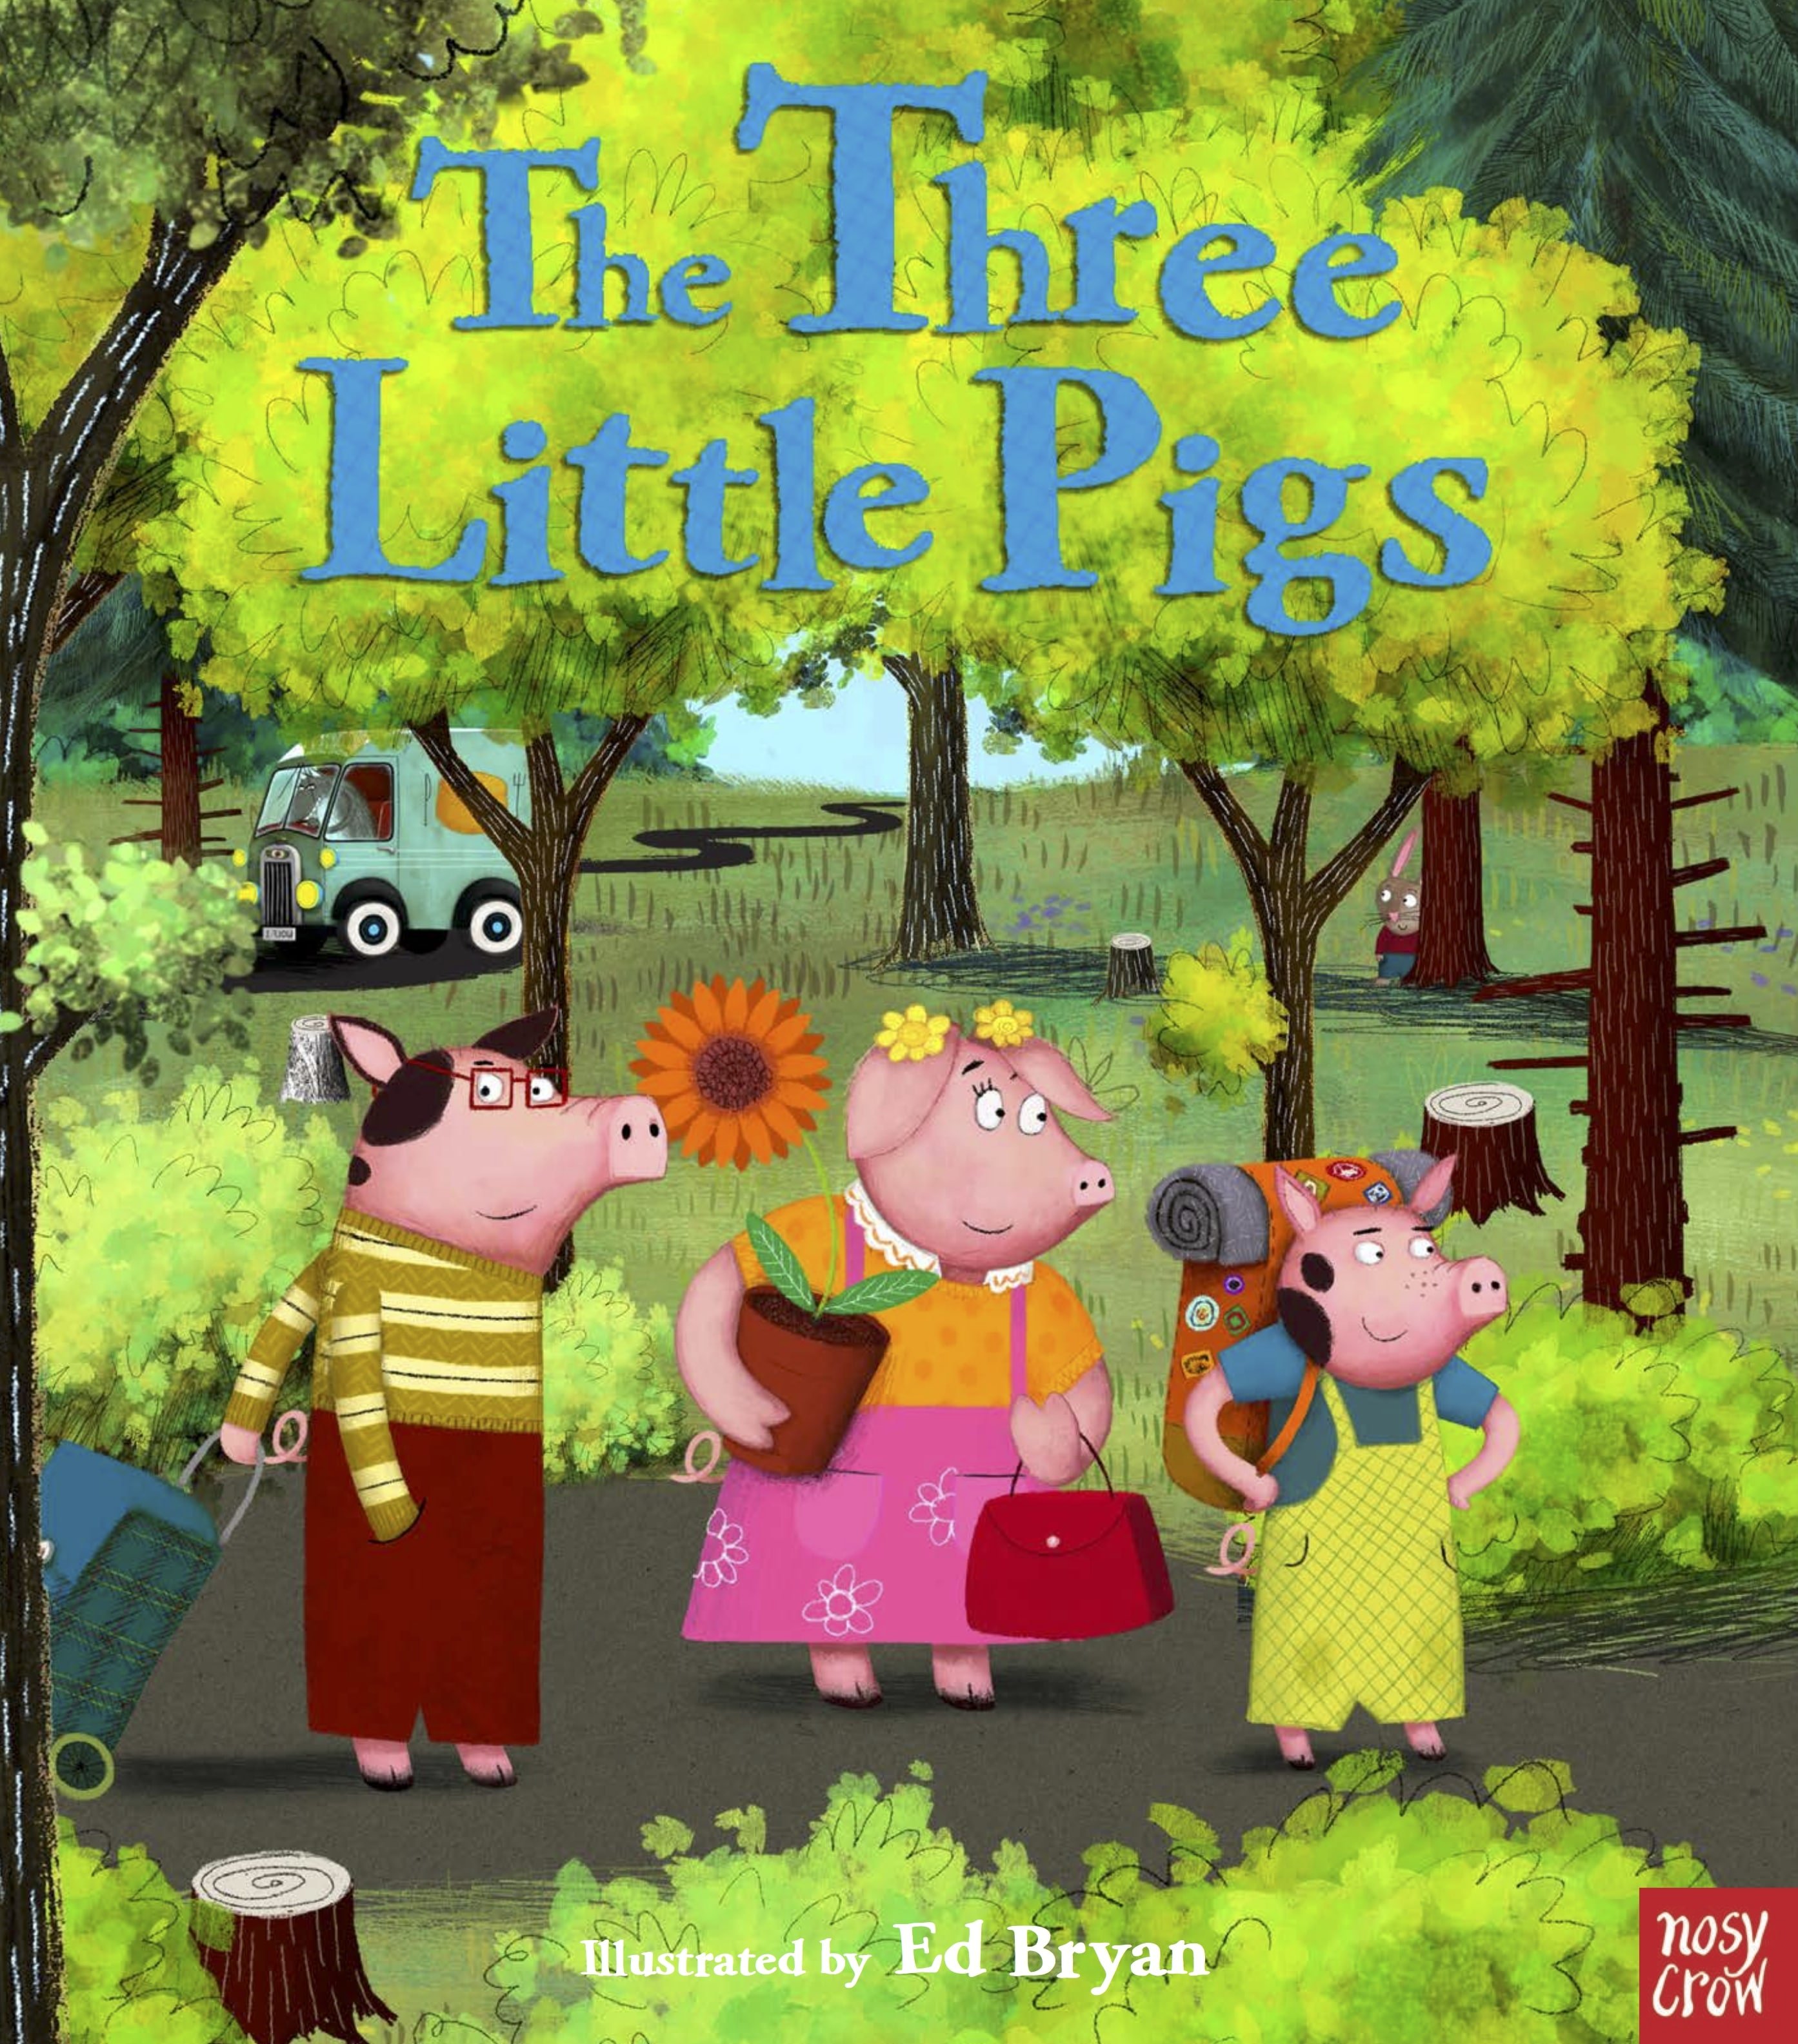 The Three Little Pigs by Nosy Crow, illustrated by Ed Bryan